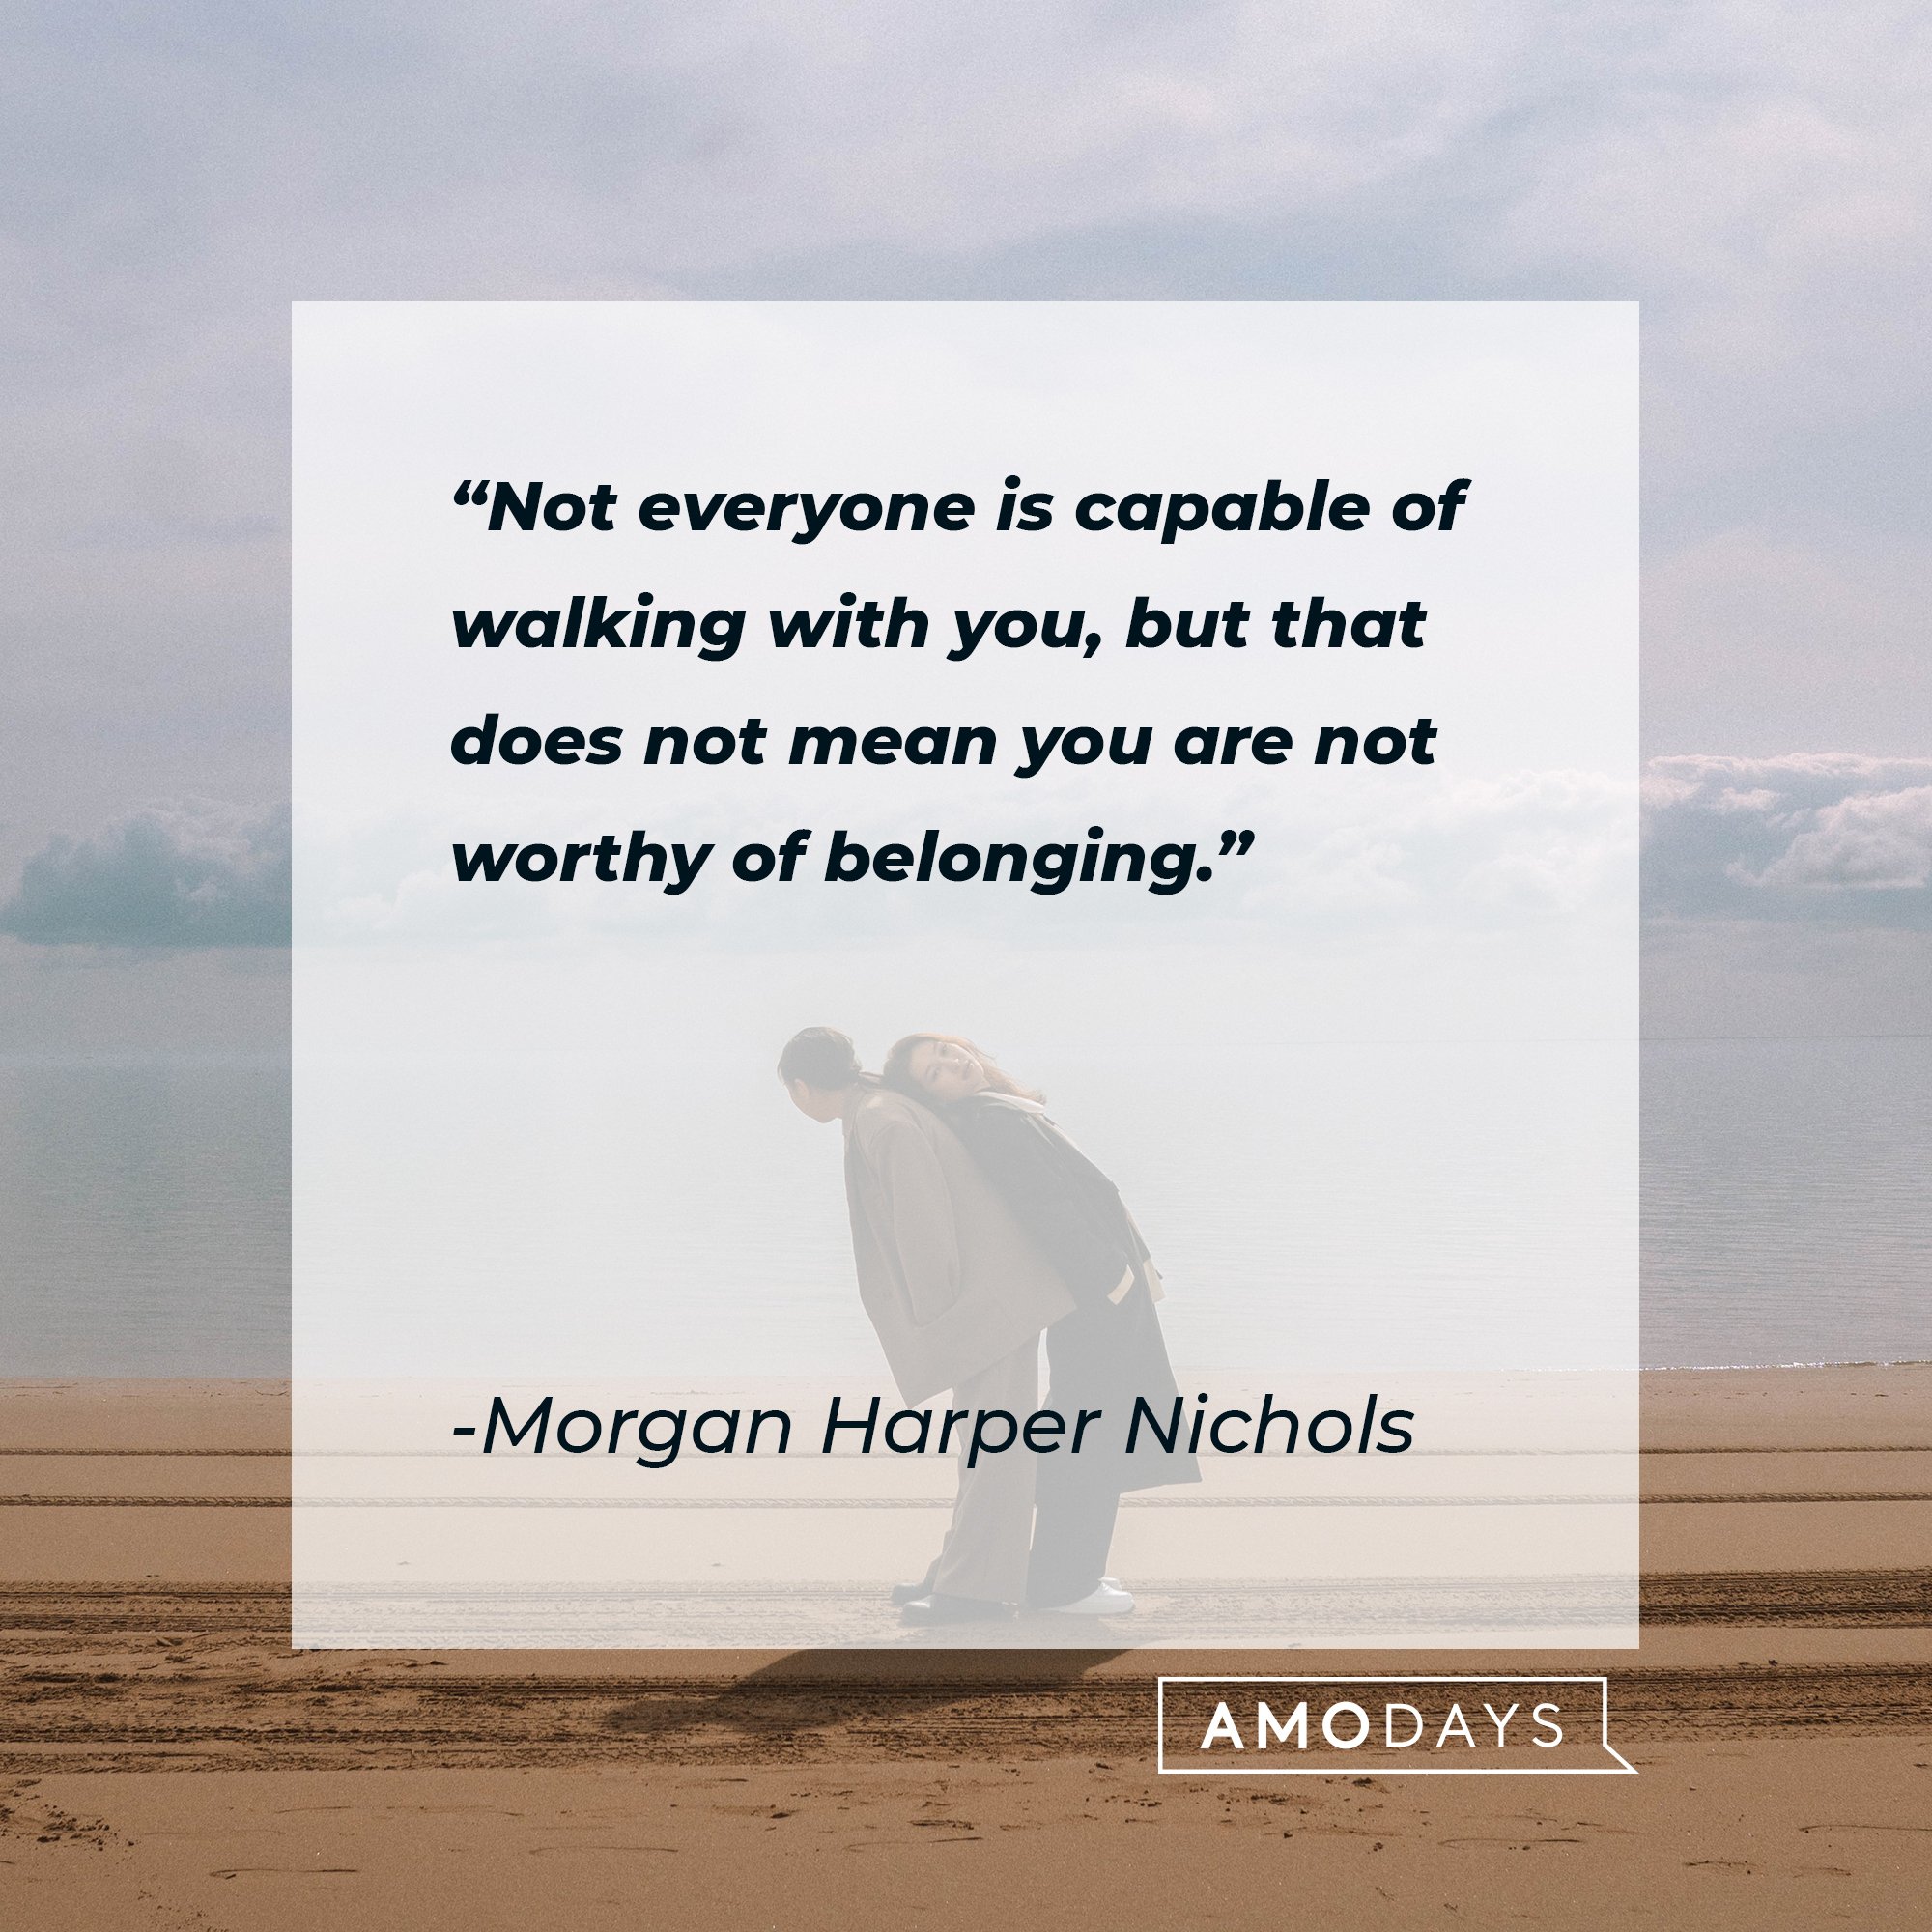 Morgan Harper Nichols’ quote: "Not everyone is capable of walking with you, but that does not mean you are not worthy of belonging."  | Image: AmoDays